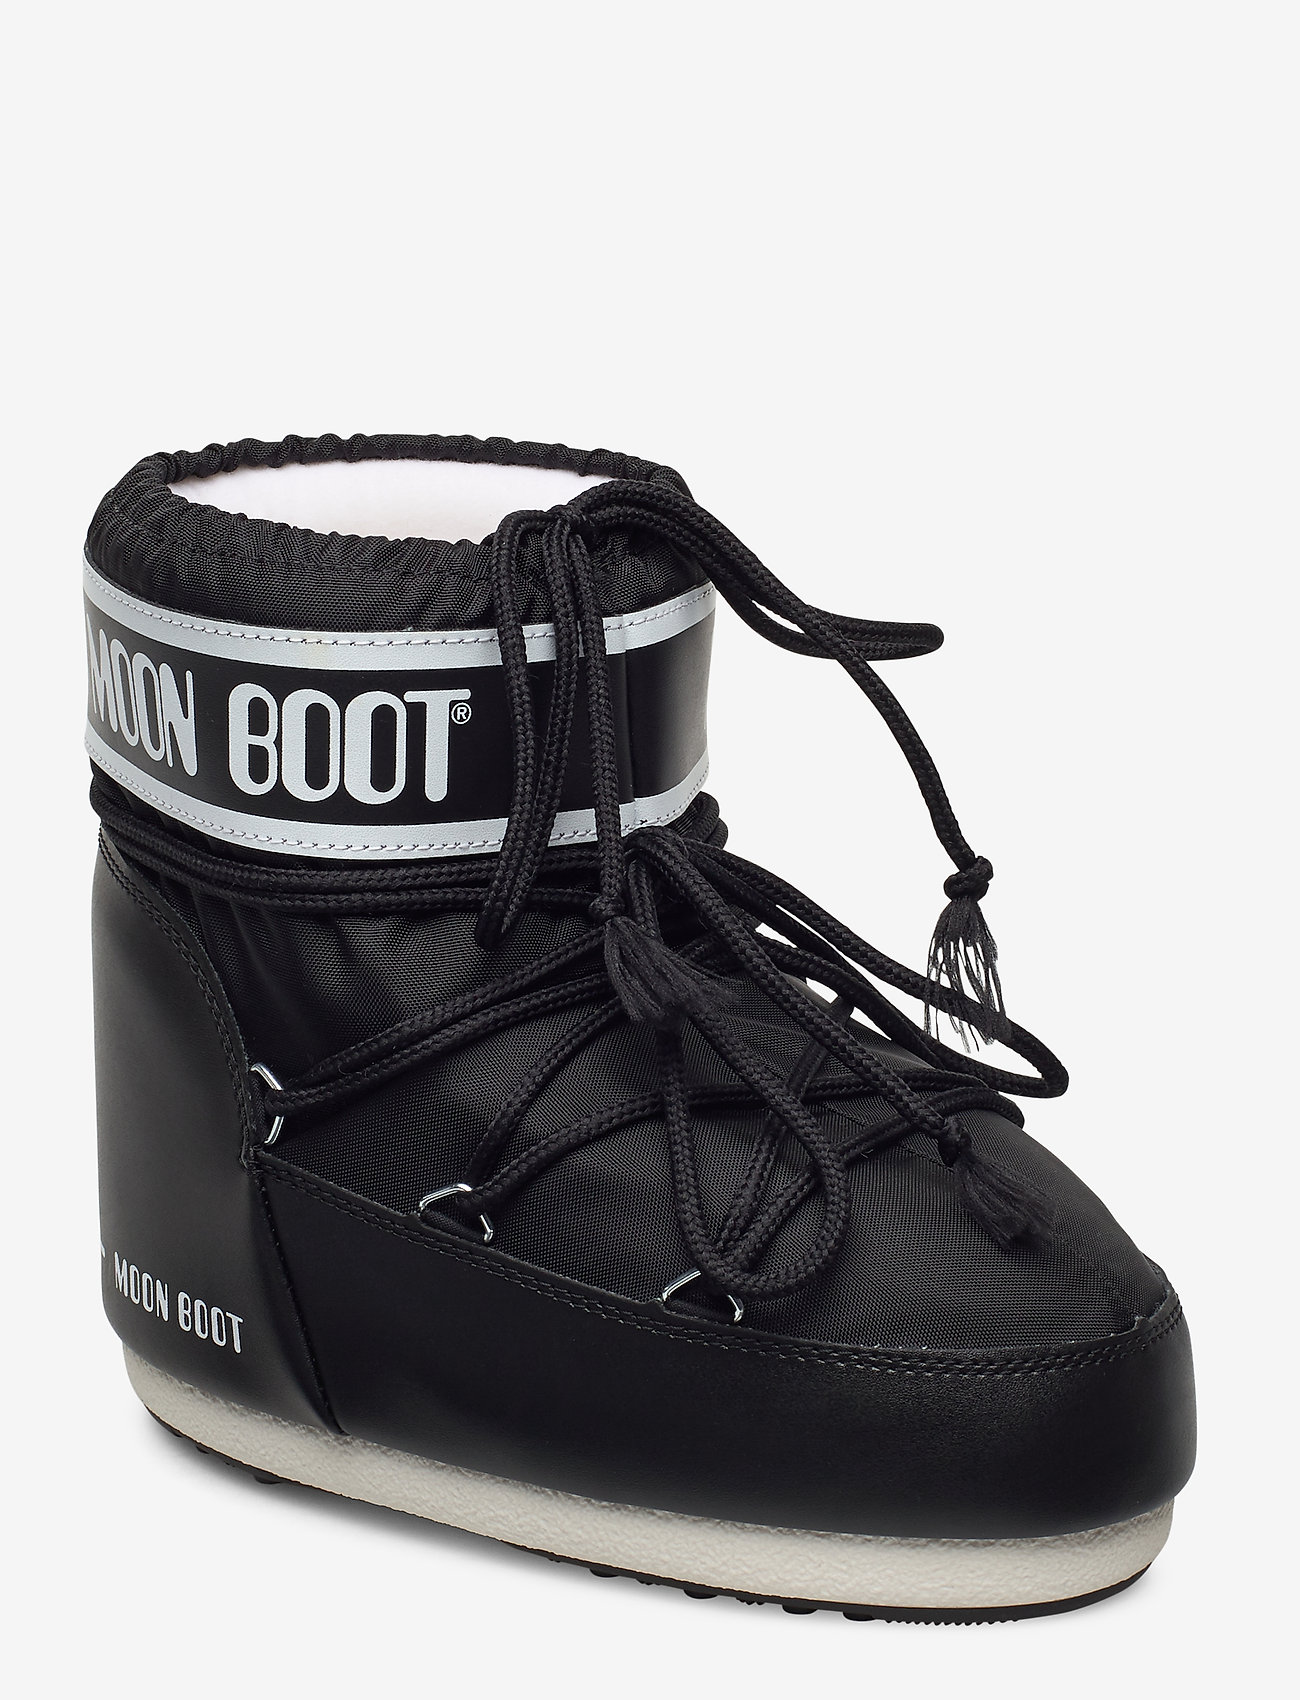 moon boots black friday sale